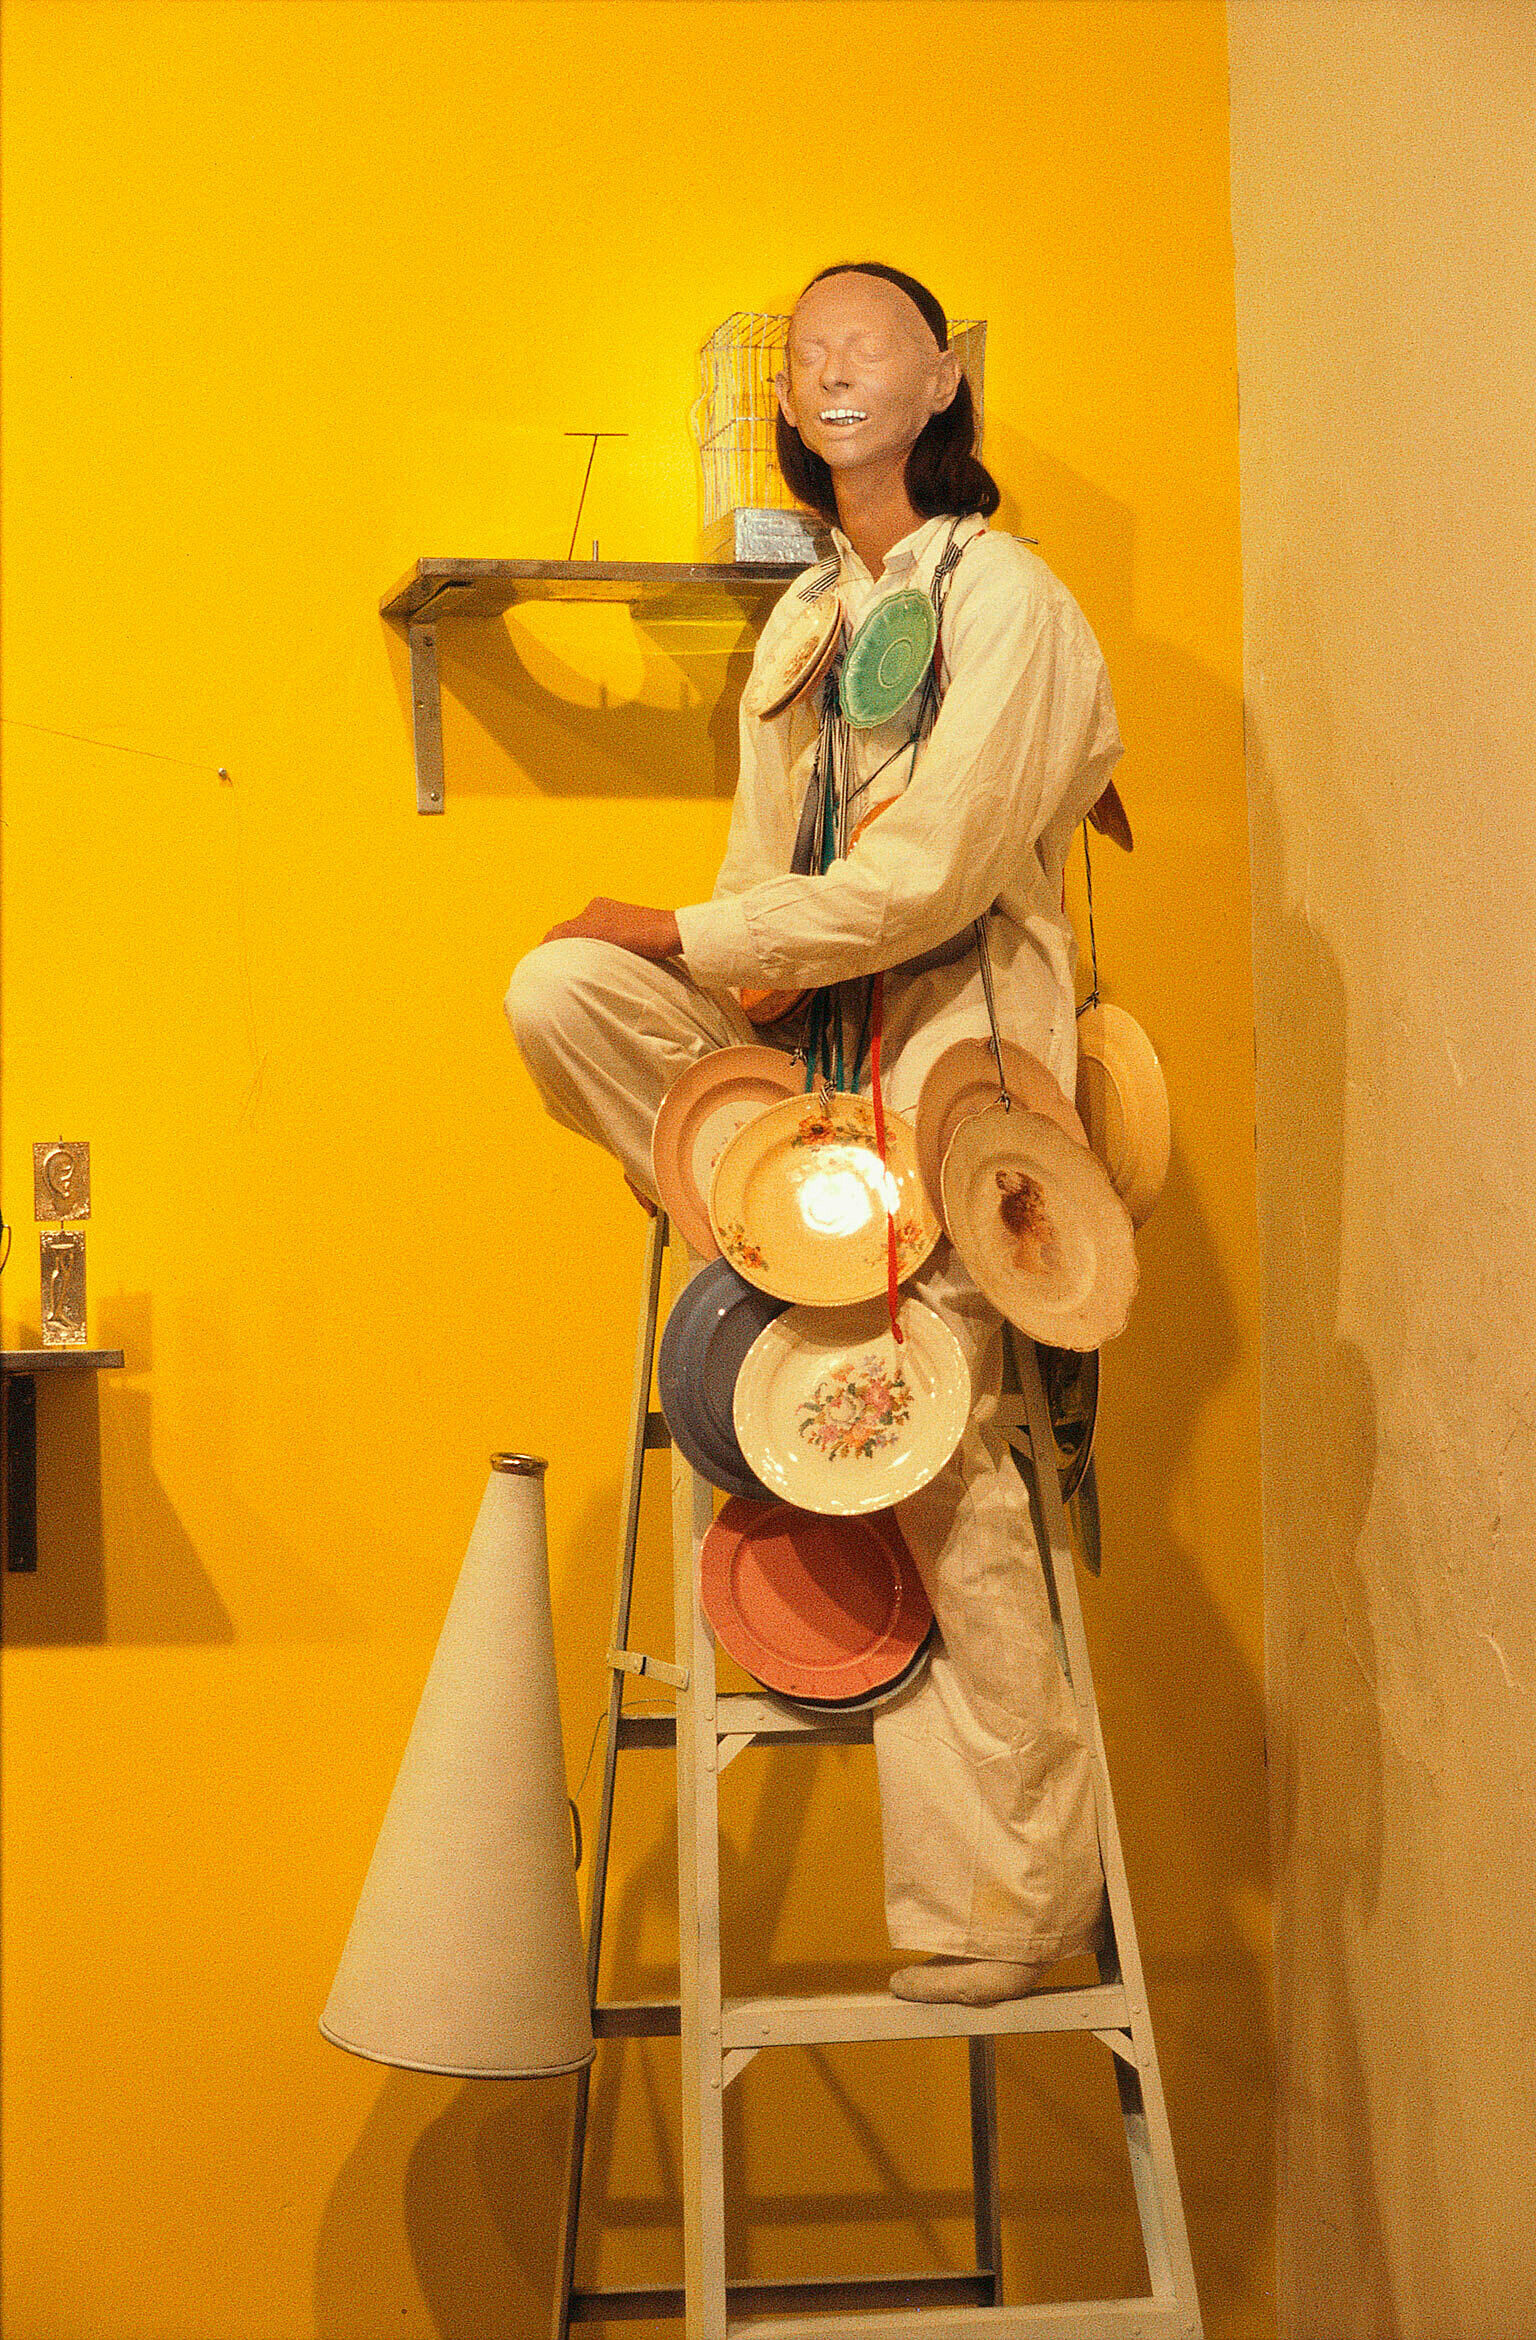 A performance artists stands on a ladder with plates attached to them.